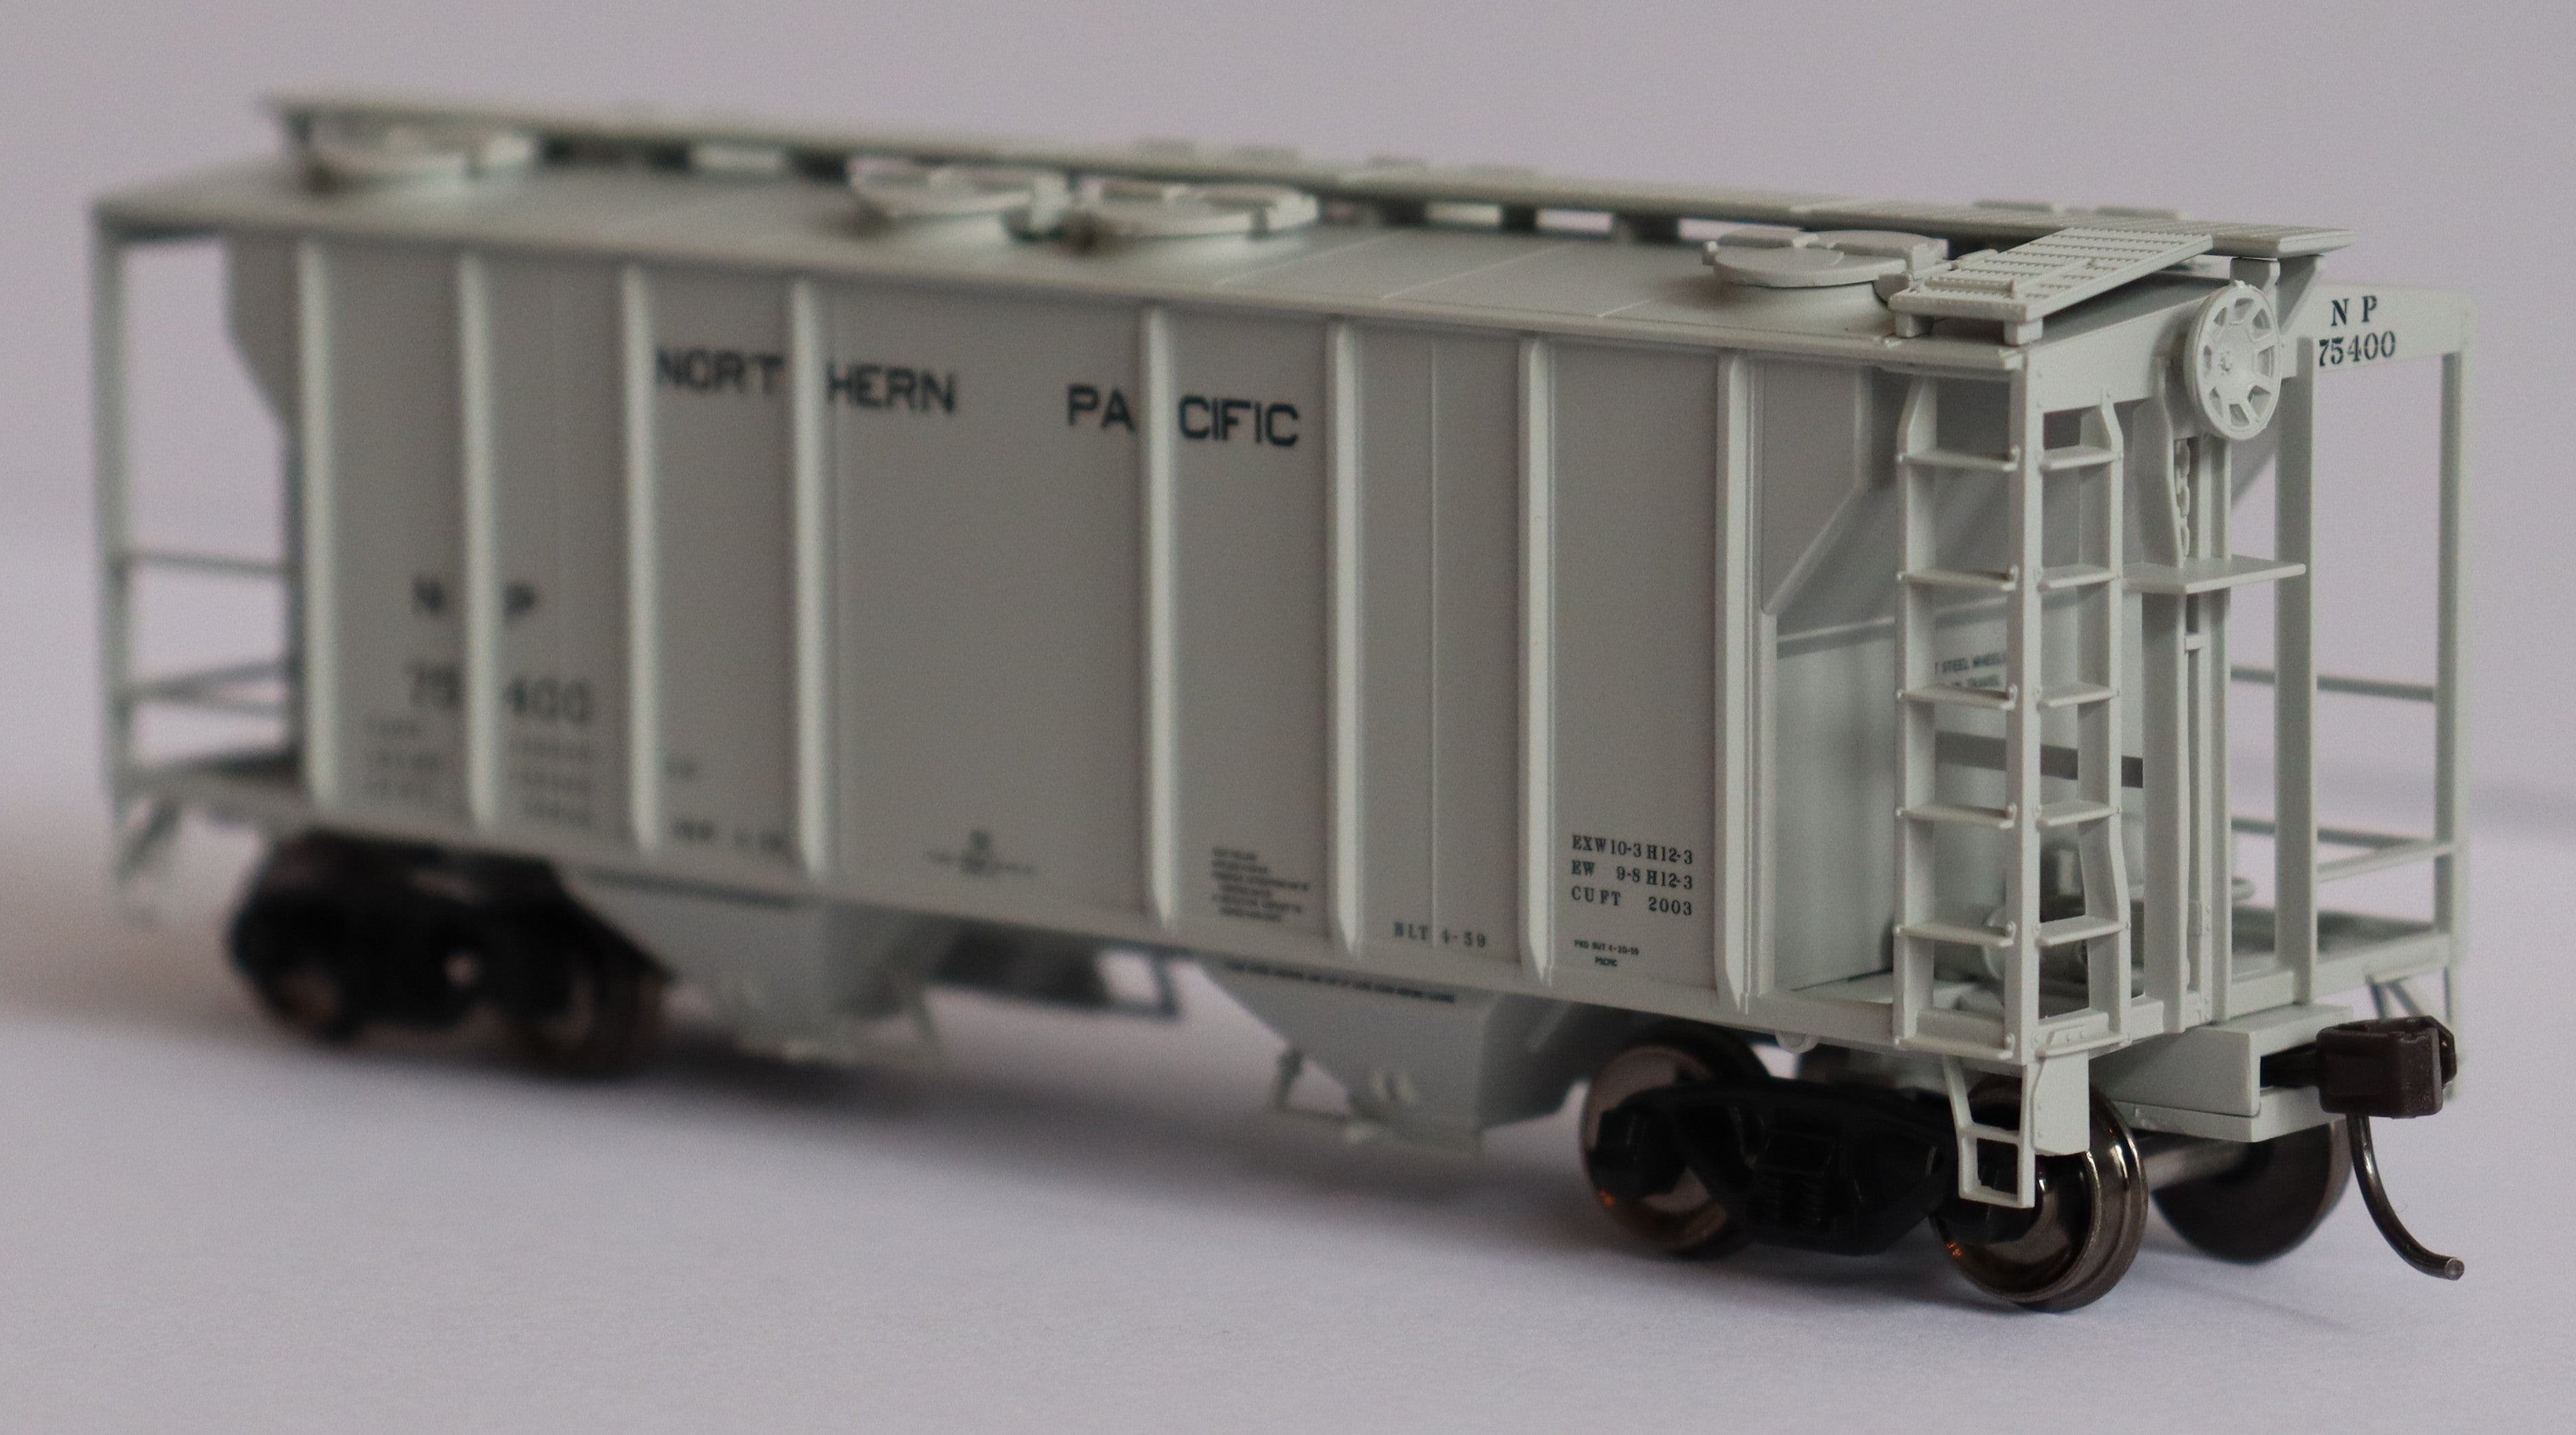 Atlas AHO-20006565 HO TM PS-2 COVERED HOPPER NORTHERN PACIFIC #75422